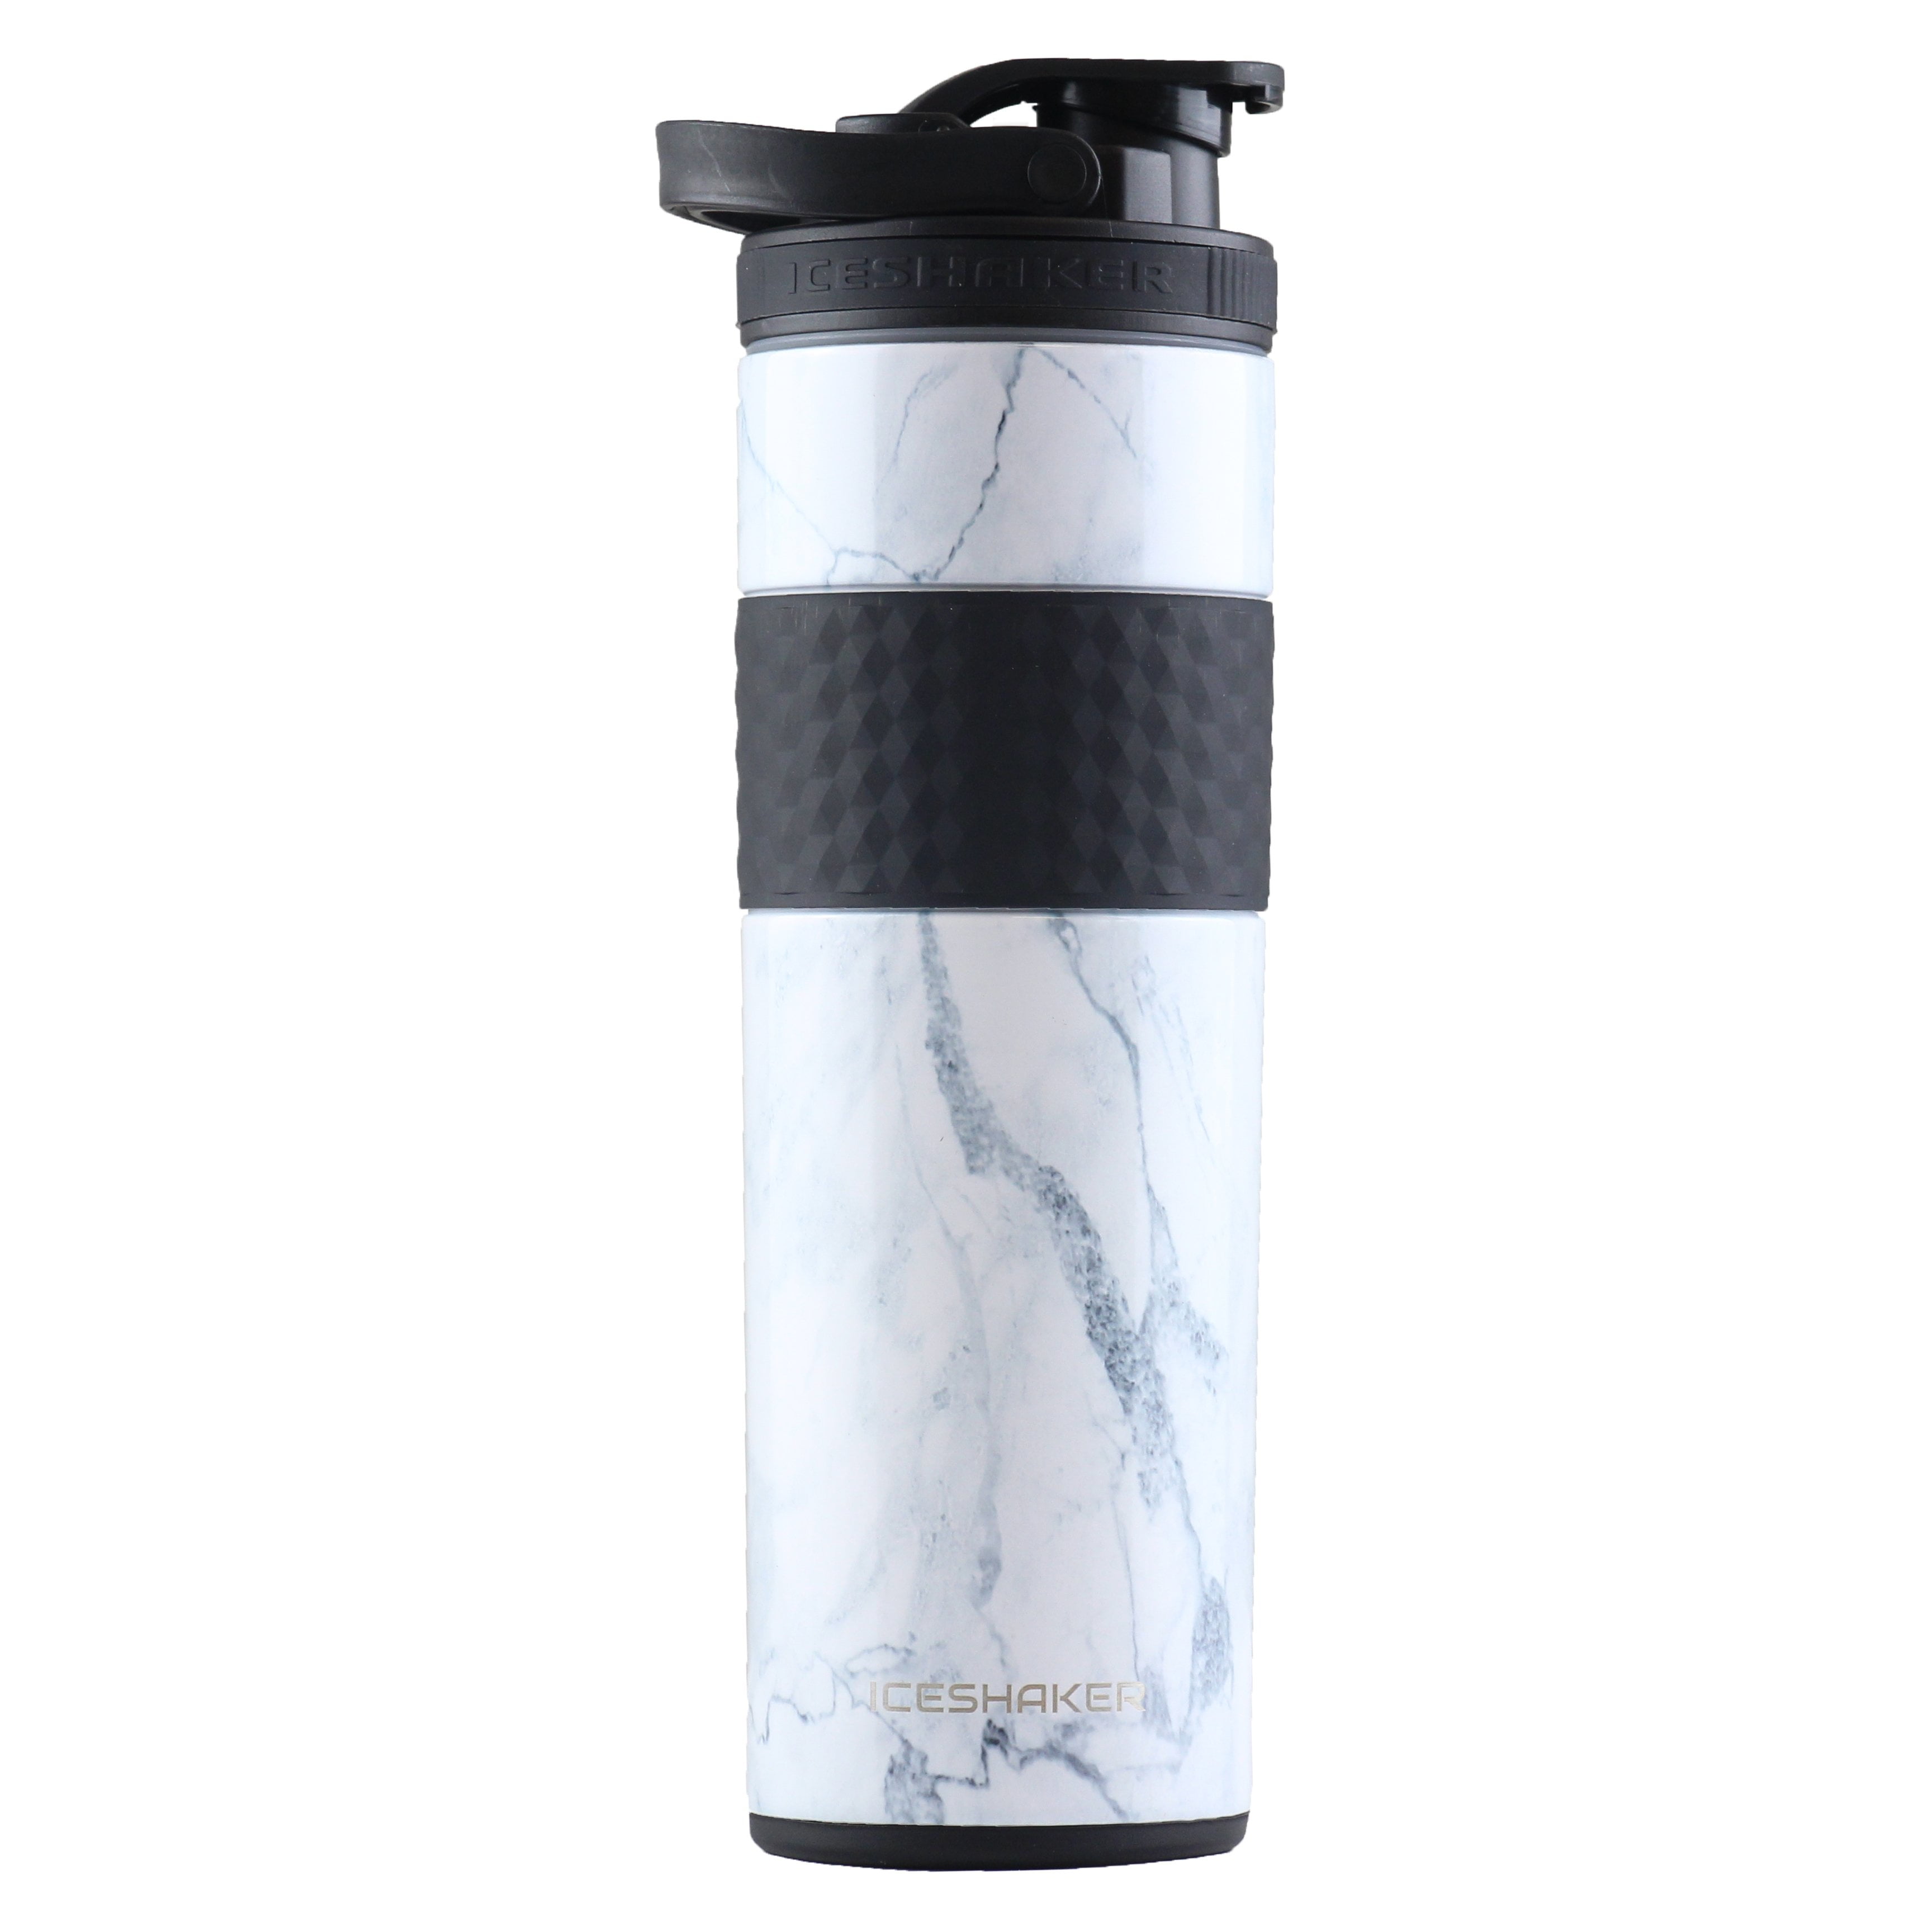 739ml Stainless Steel Shaker Bottle GYM Sports Portable Double Wall Vacuum  Protein Powder Nutrition Water Bottles